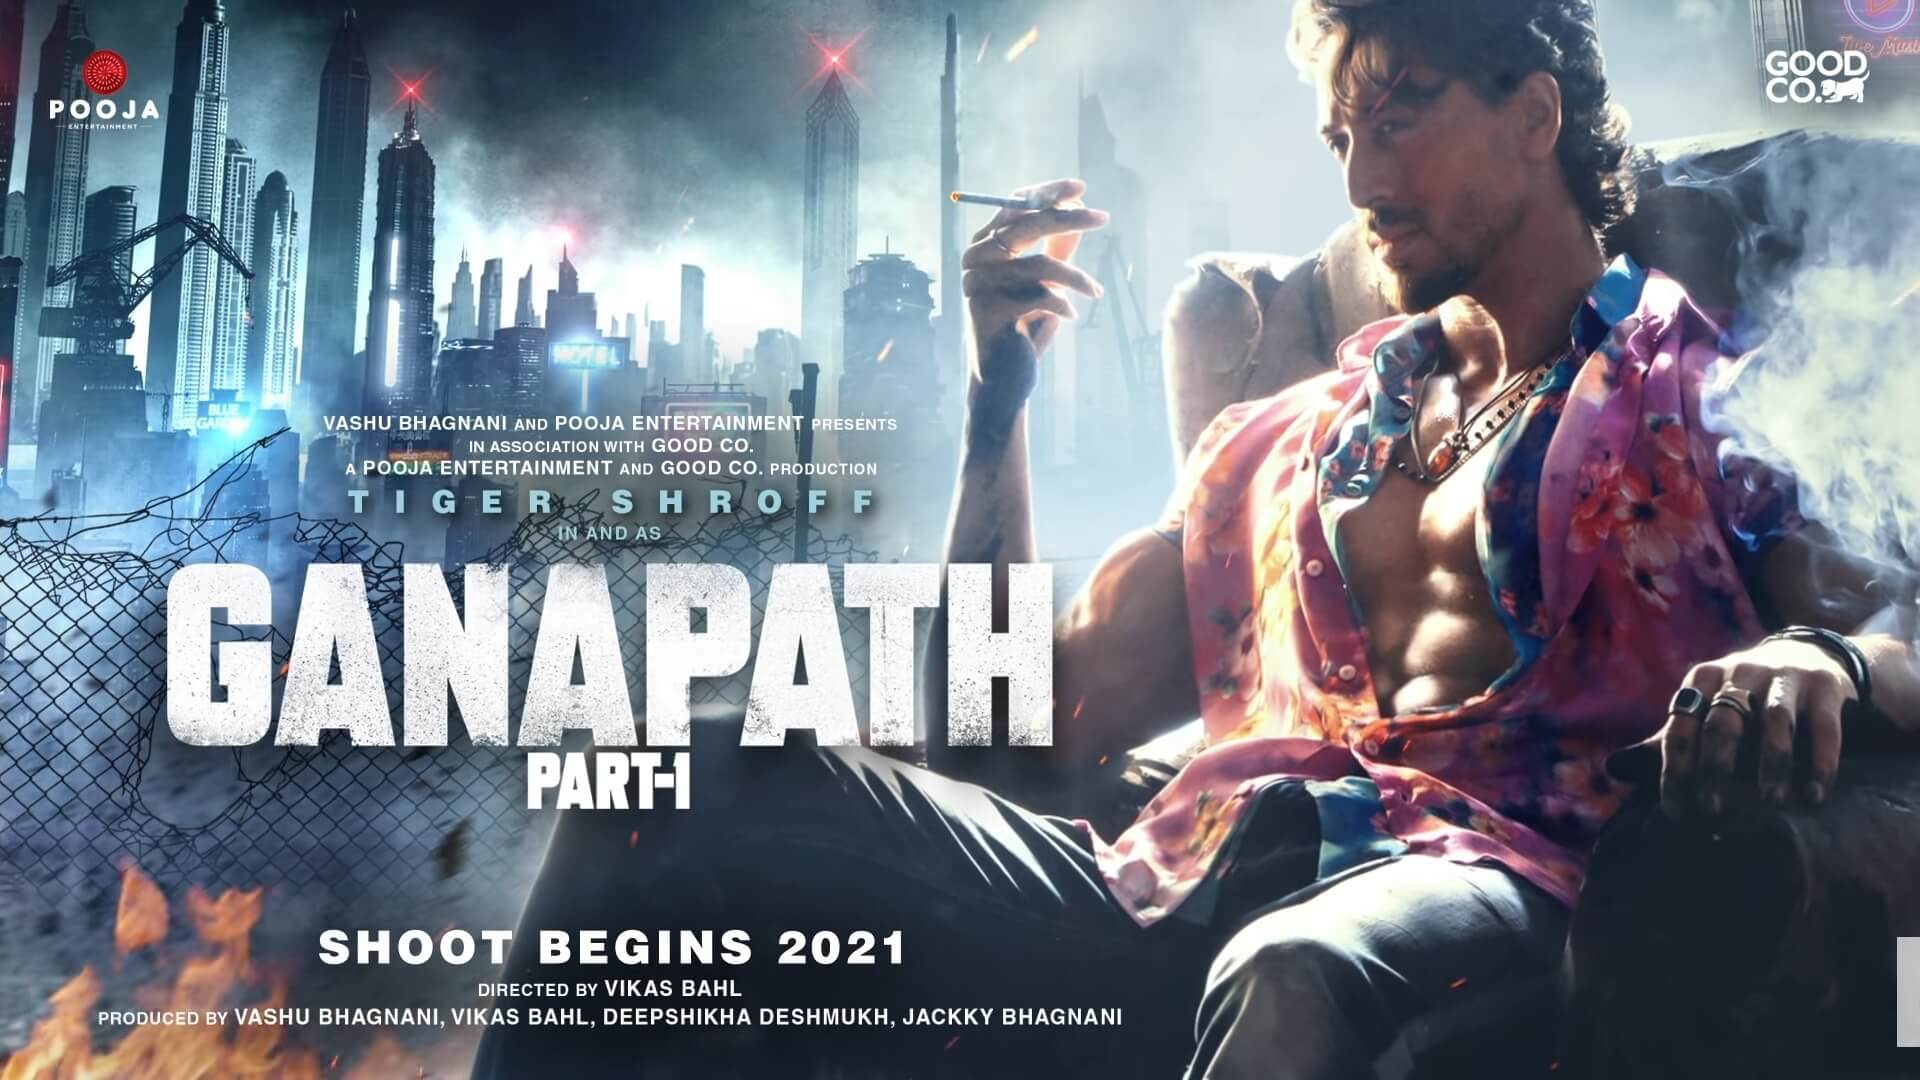 Ganapath - Part 1 Movie (2023) Cast, Release Date, Story, Budget, Collection, Poster, Trailer, Review